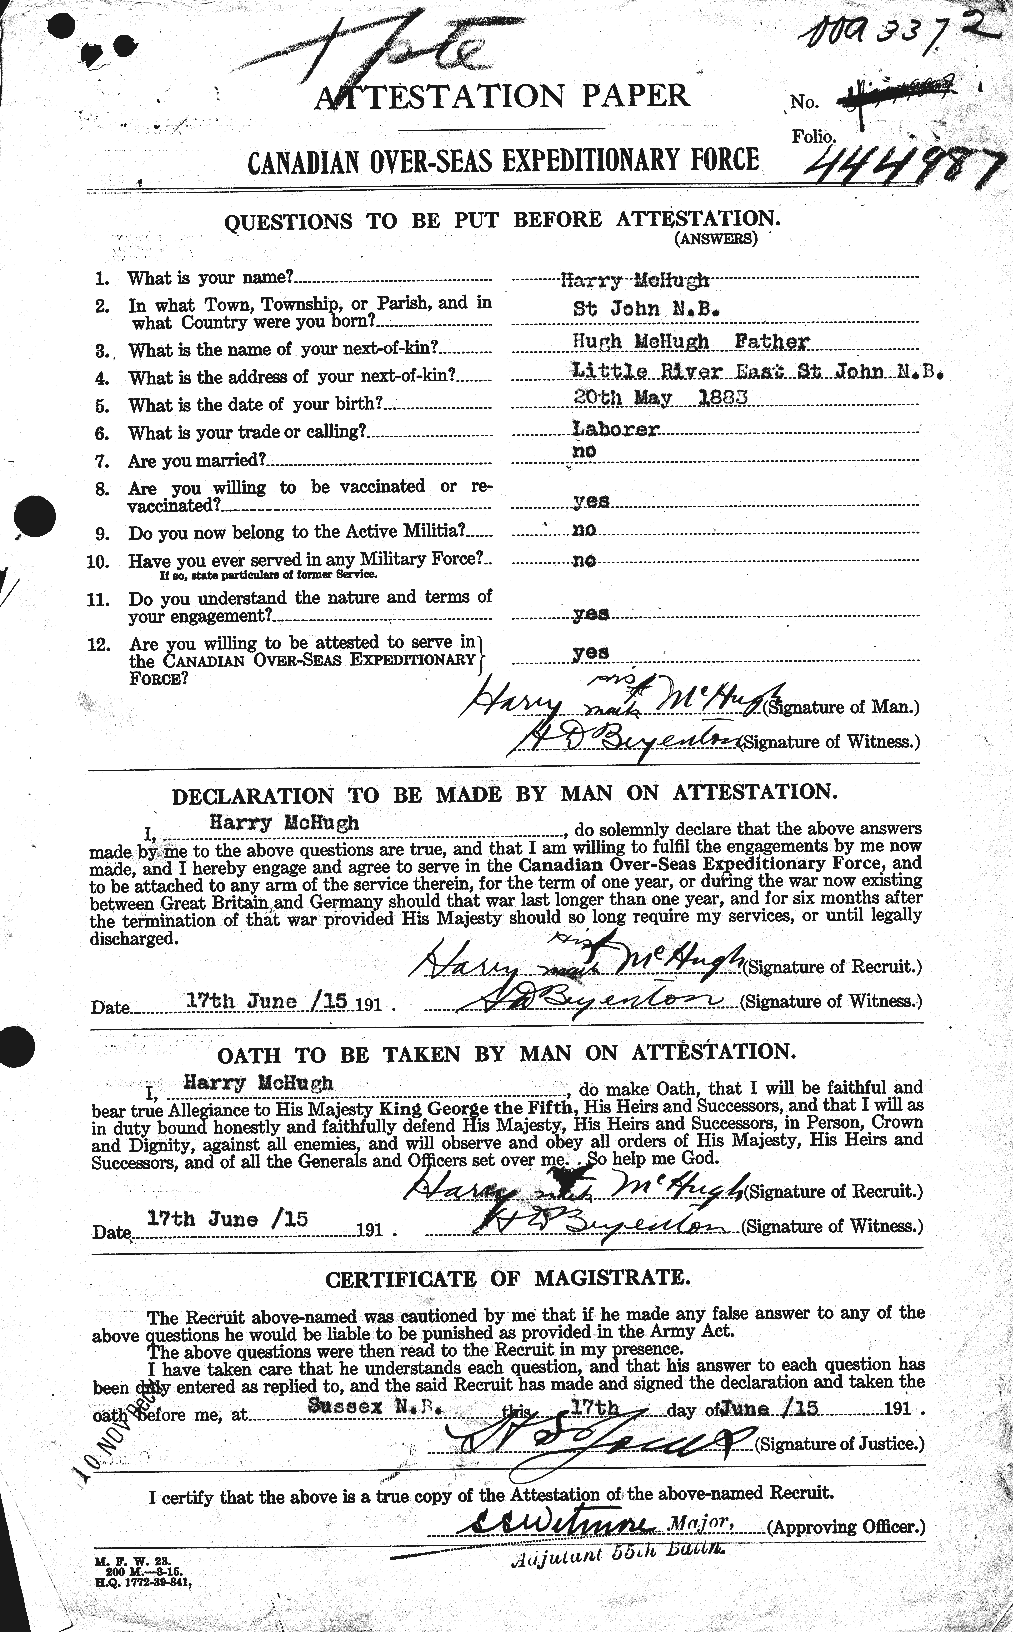 Personnel Records of the First World War - CEF 524332a